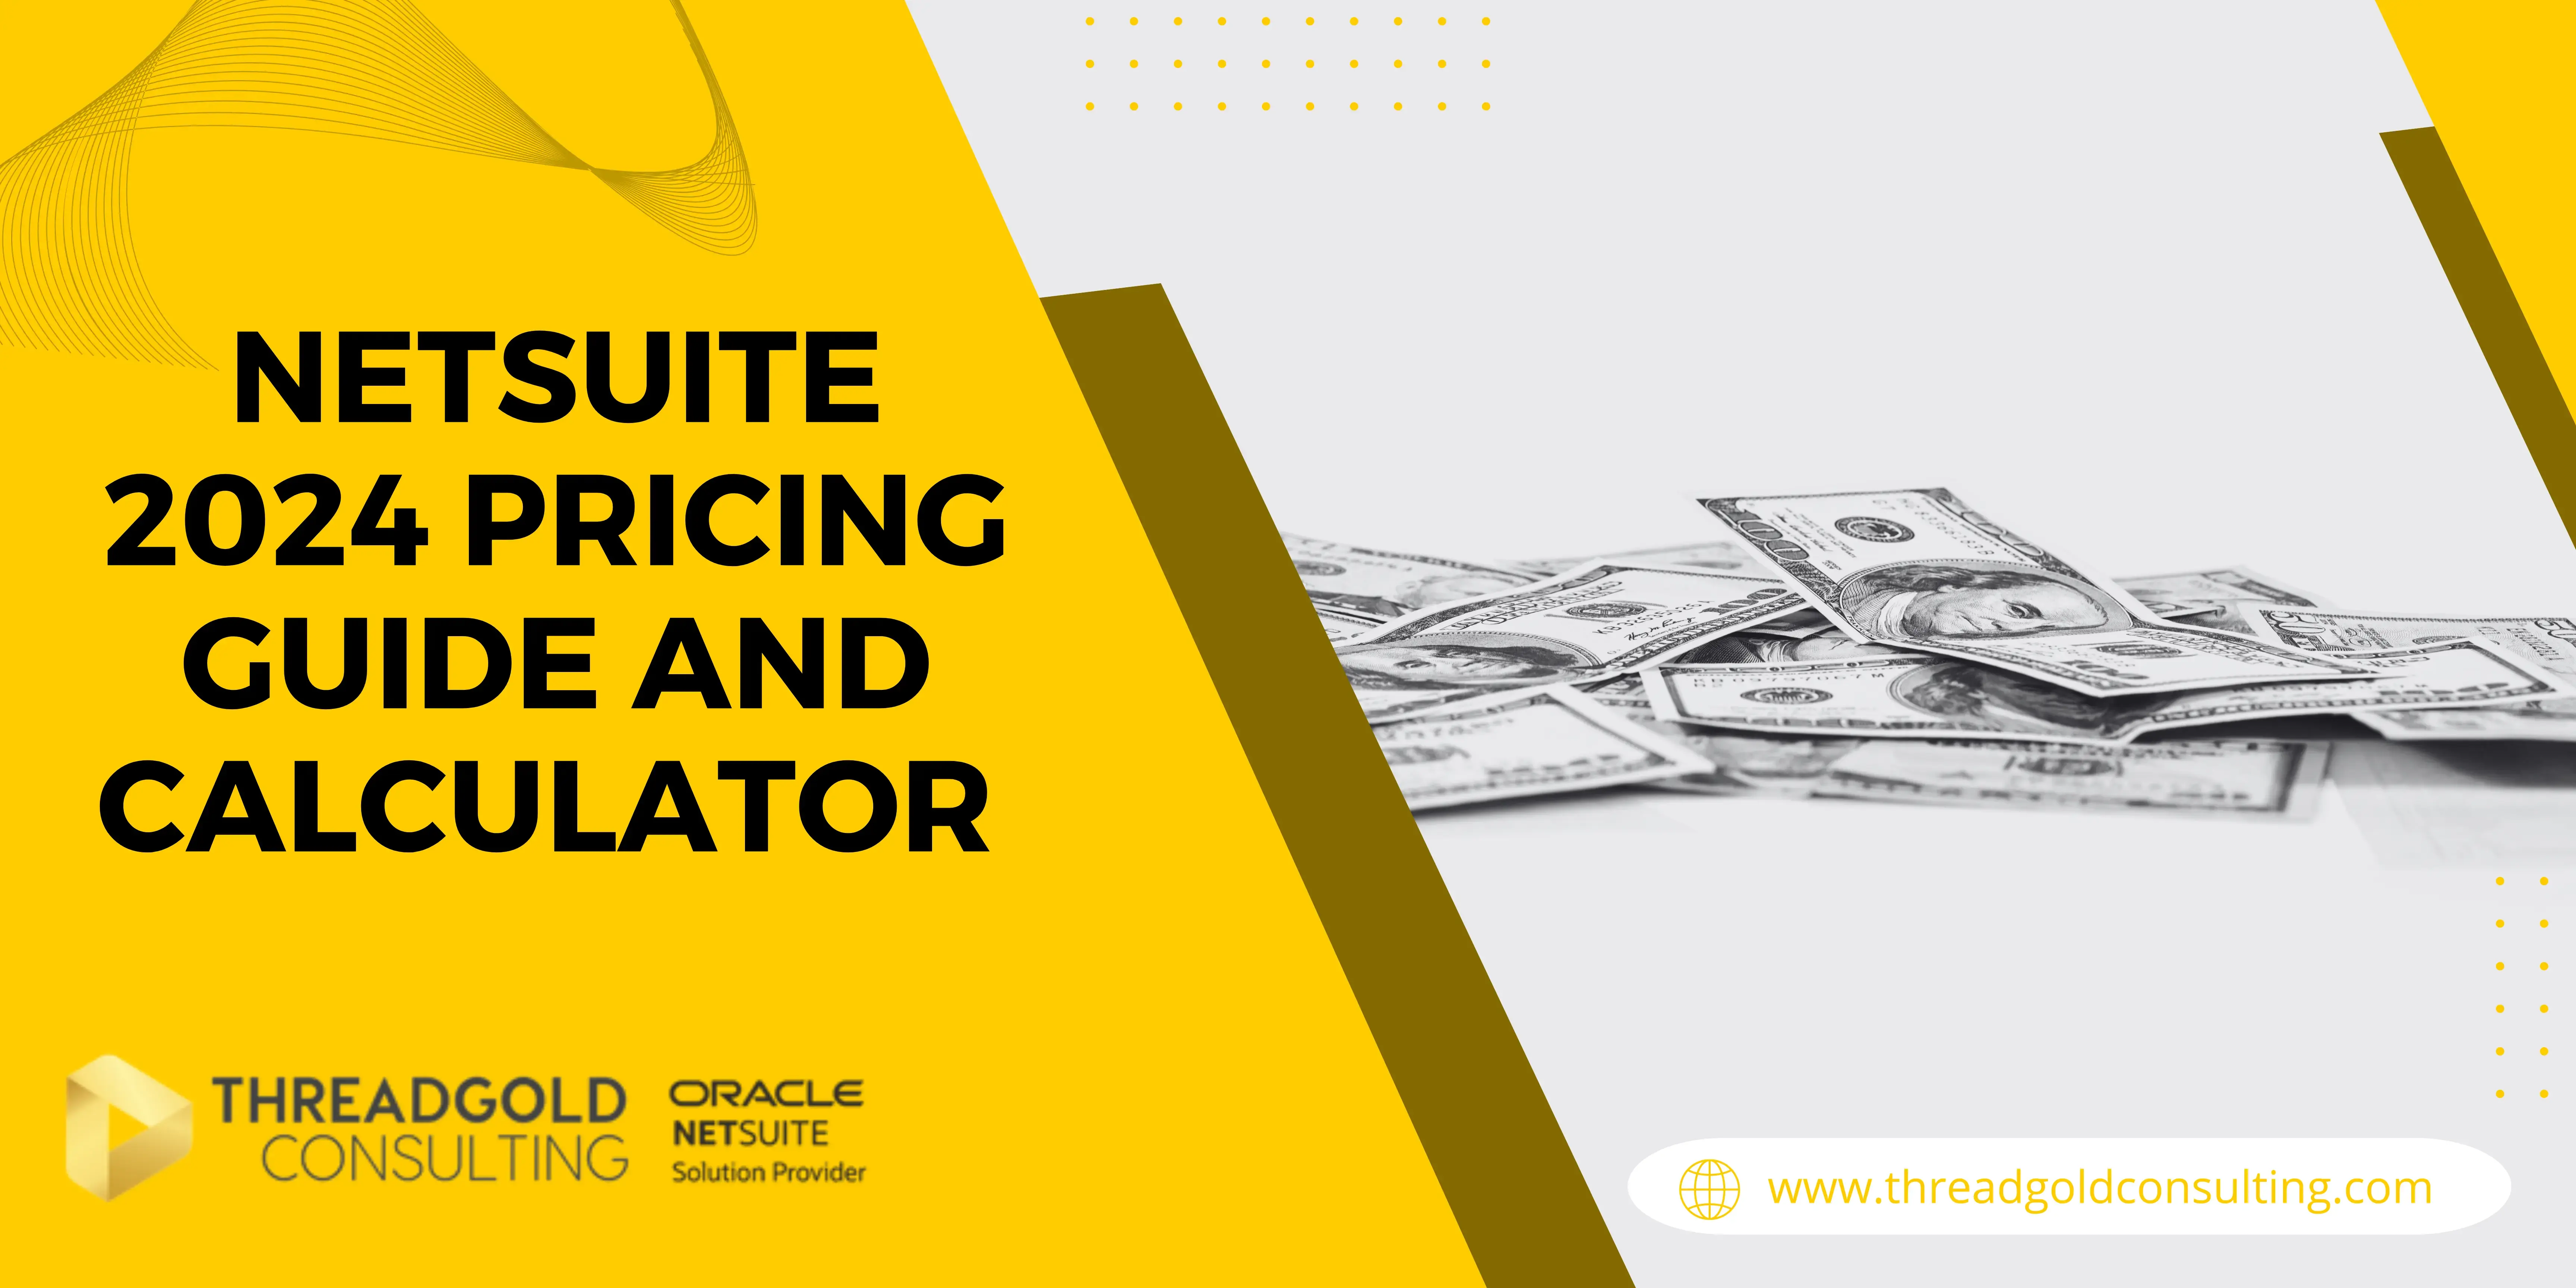 NetSuite Cost | 2024 NetSuite Pricing Guide & Calculator